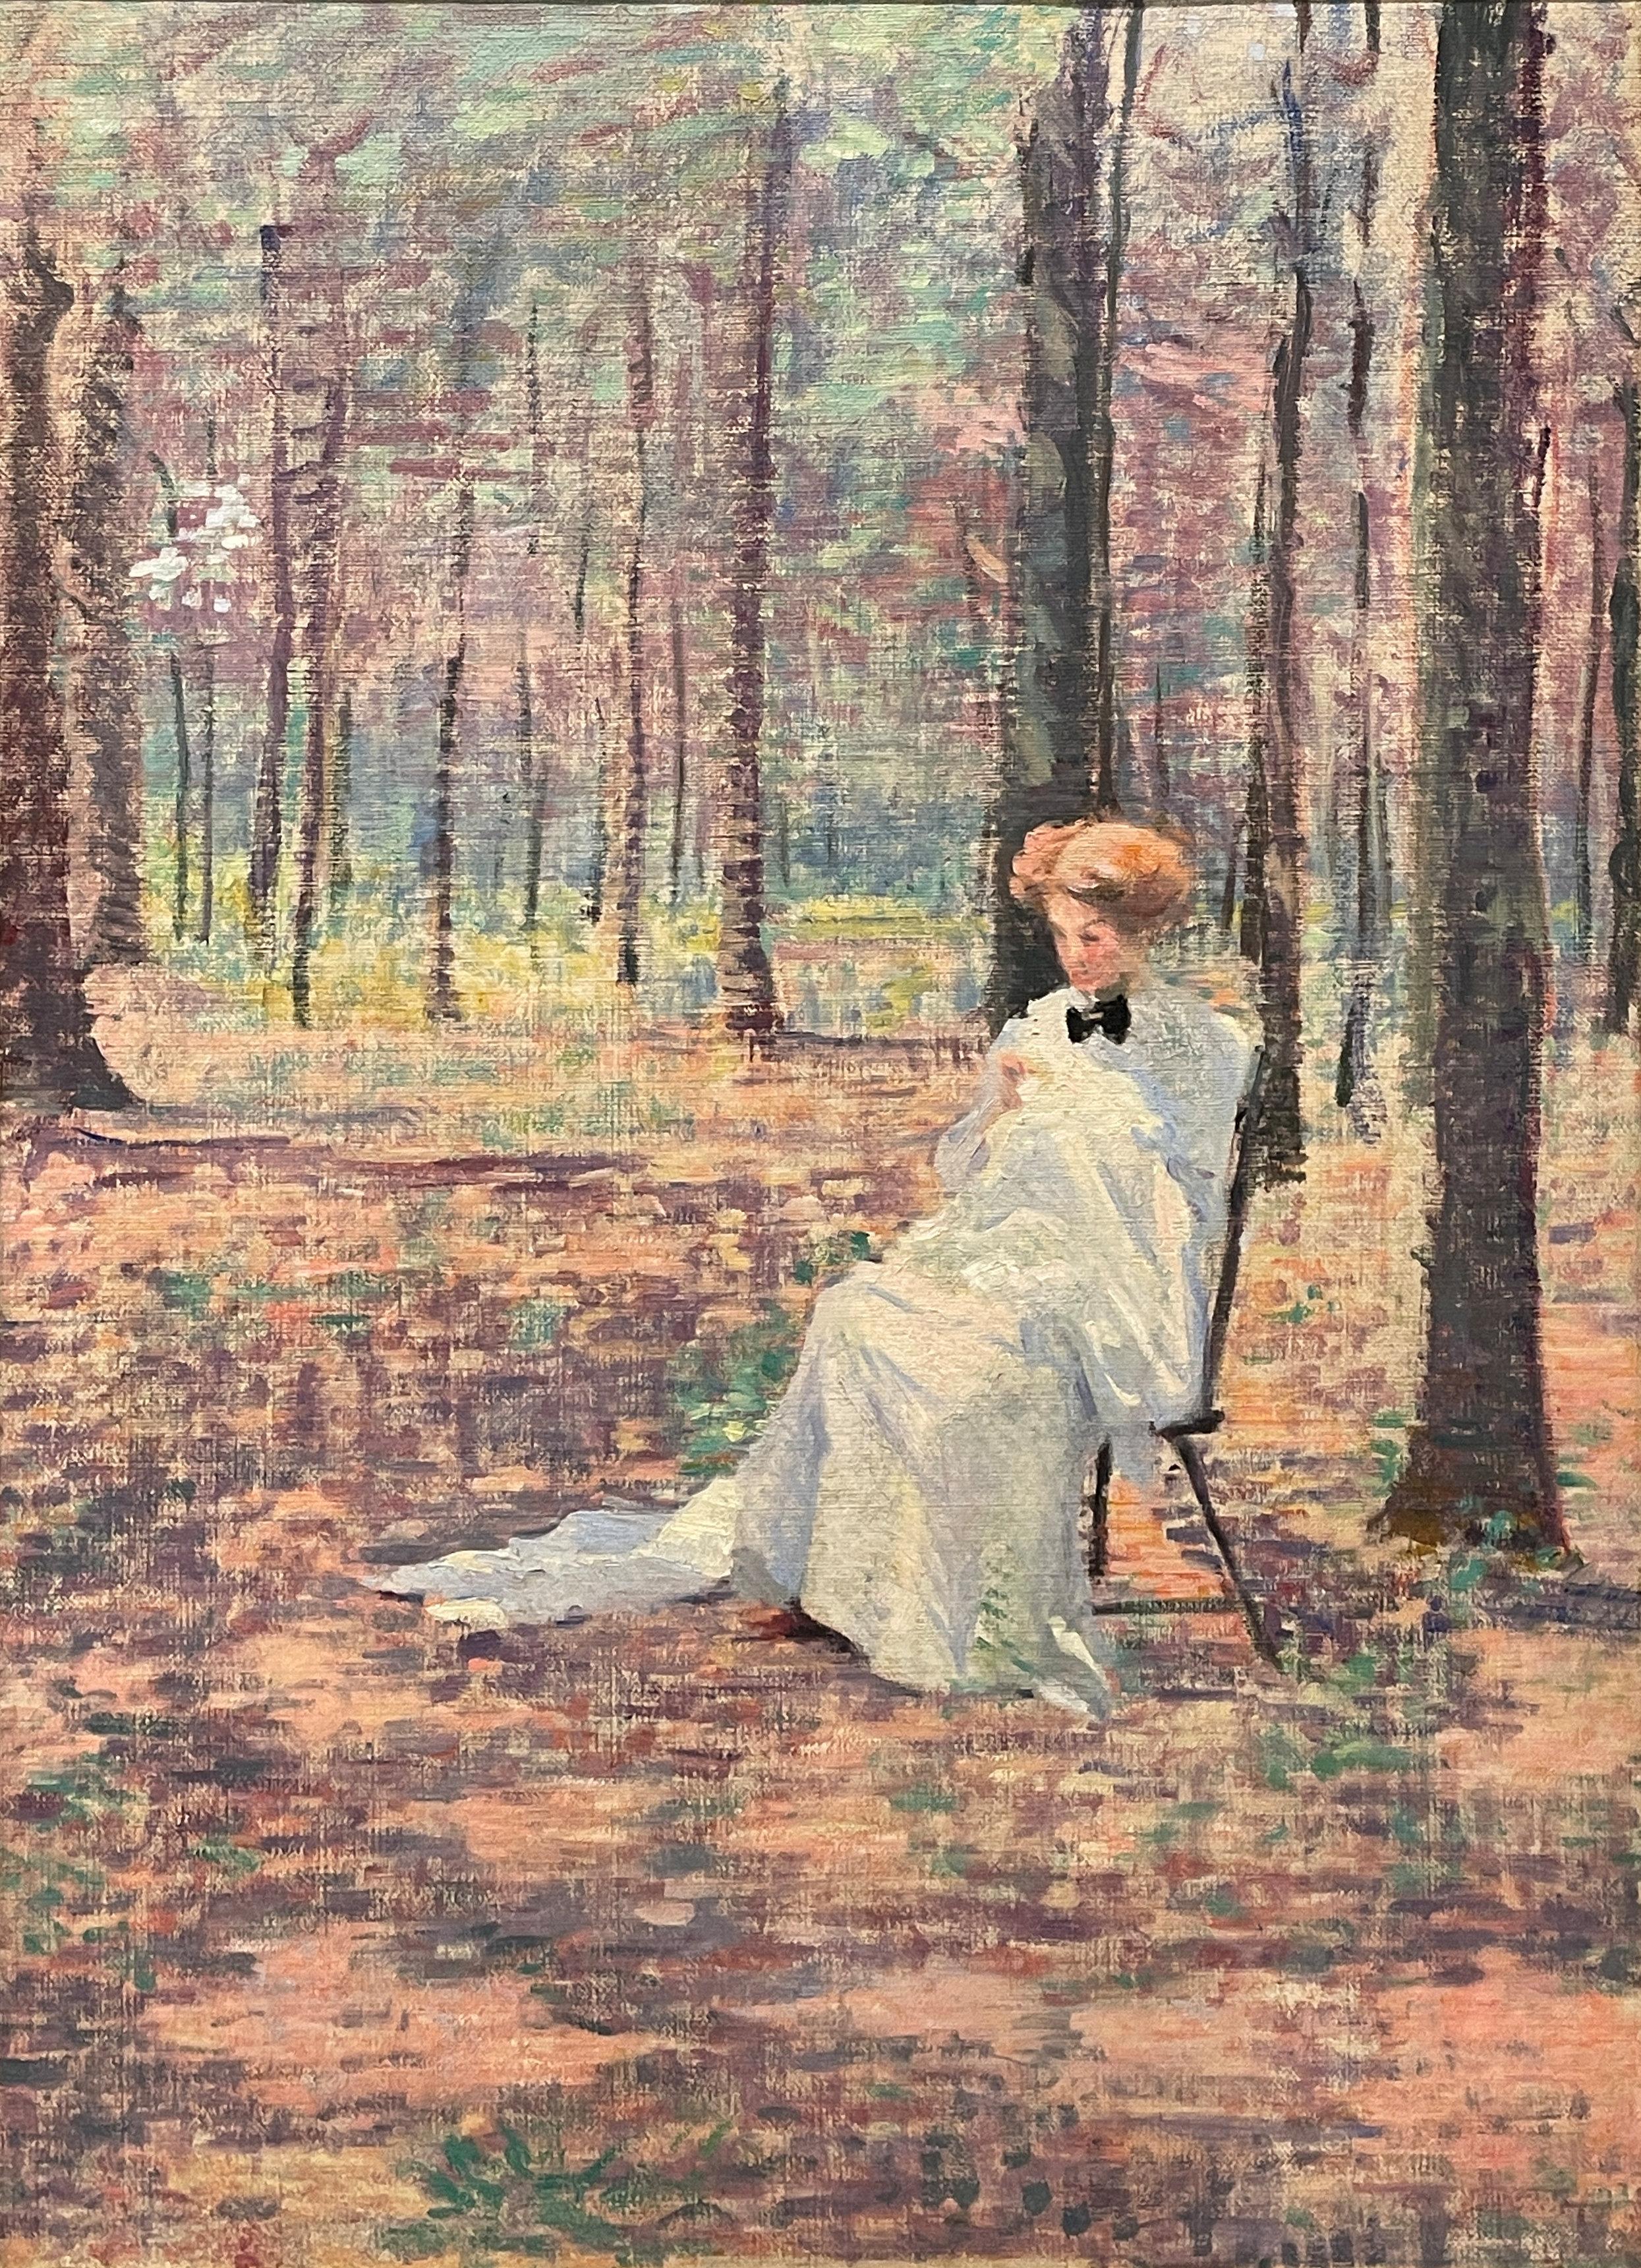 Robert Reid Landscape Painting - "Woman in a Forest Glade" Robert Lewis Reid, American Impressionist, French Lady